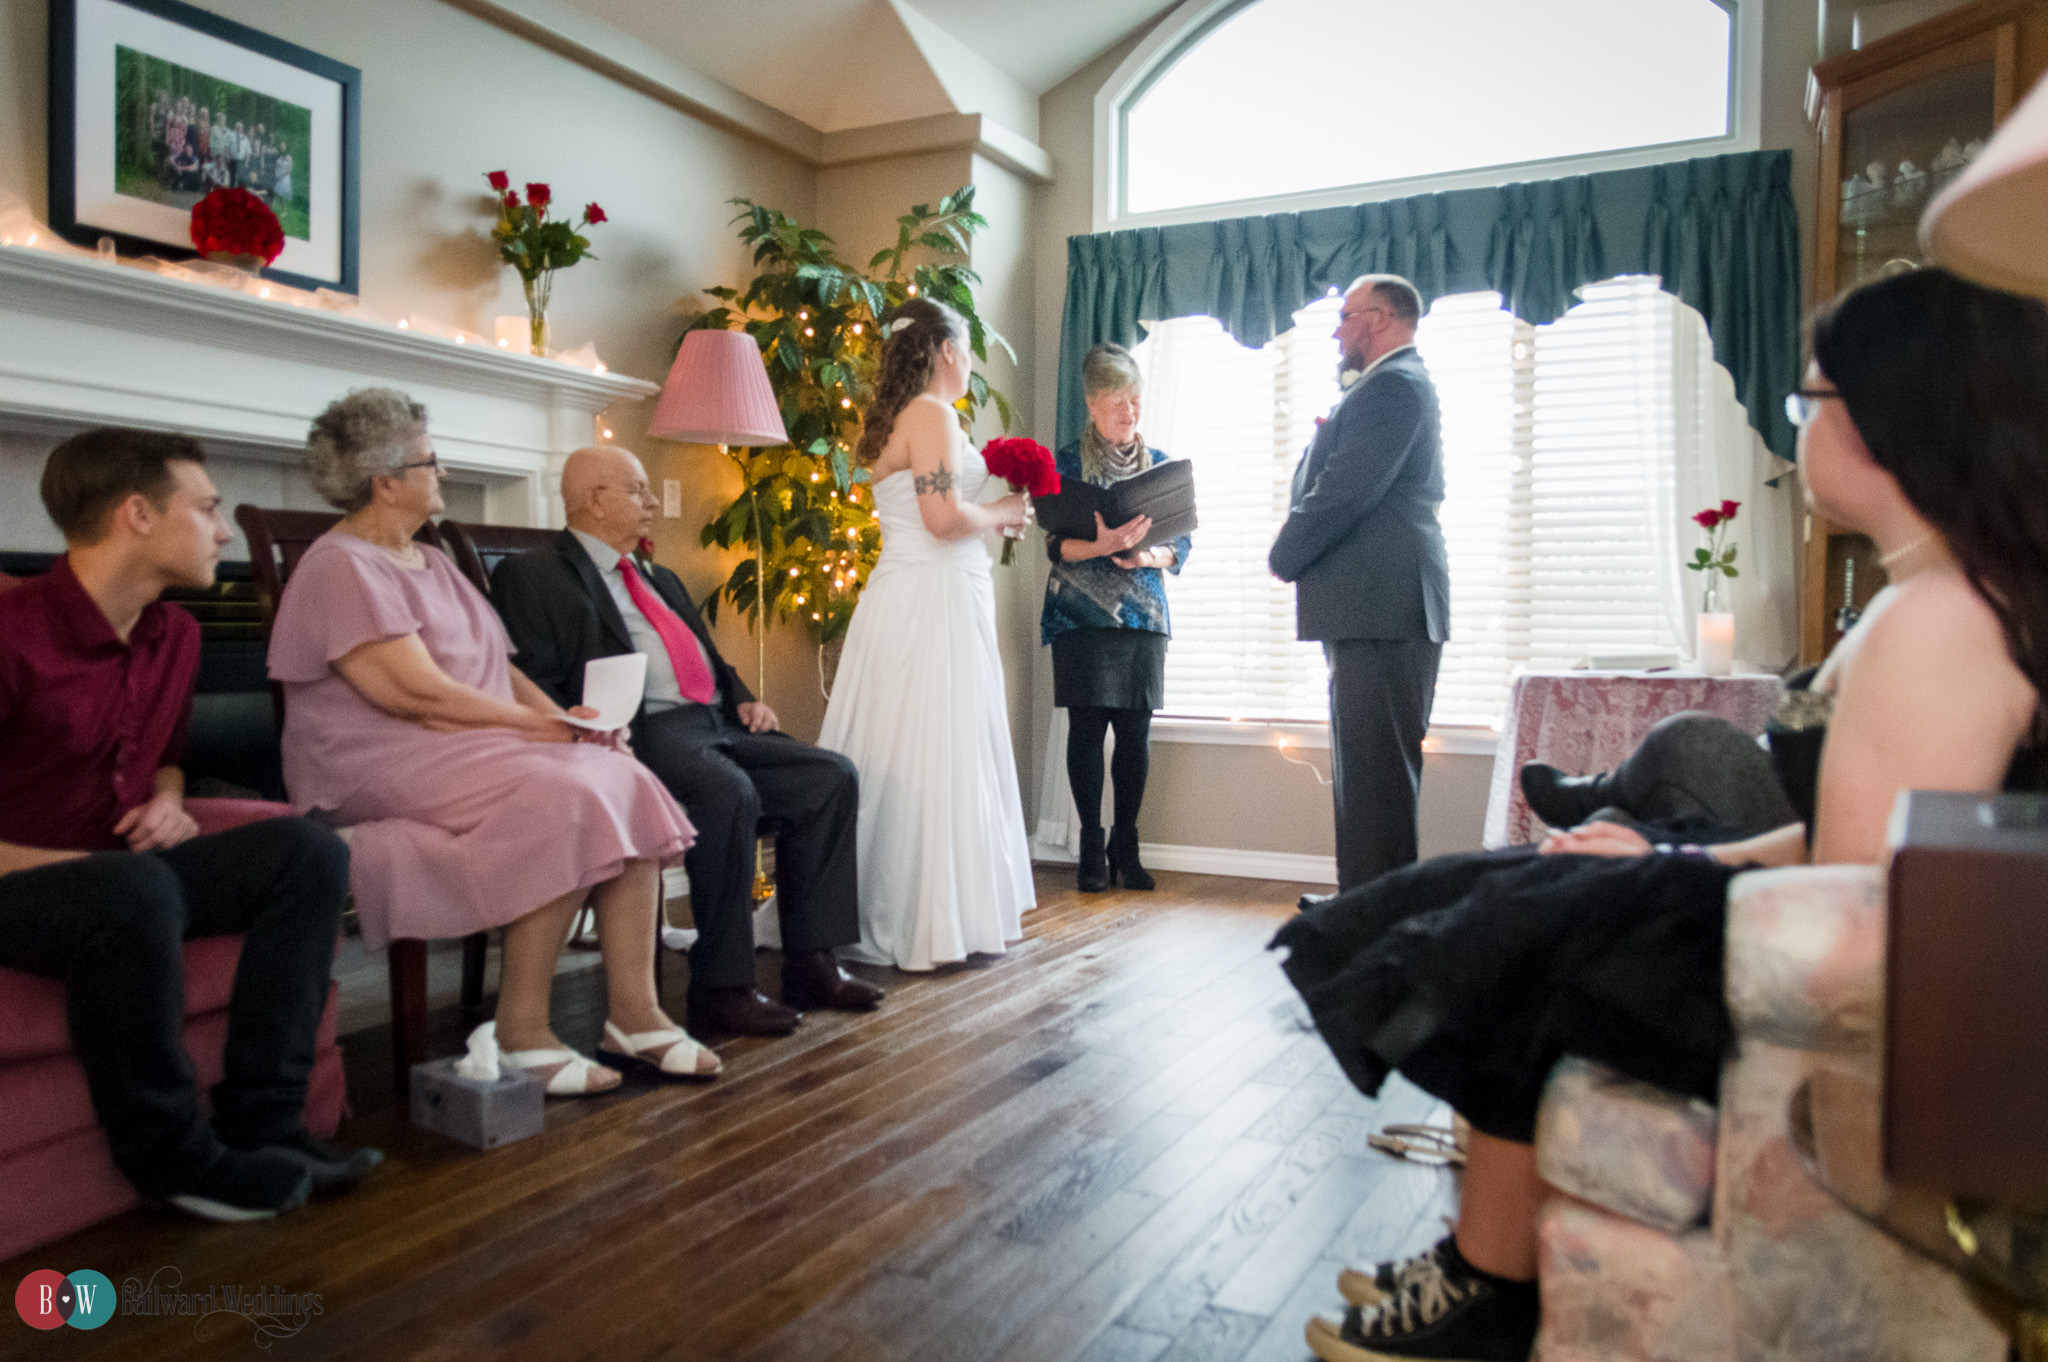 Home ceremony with bride and groom standing